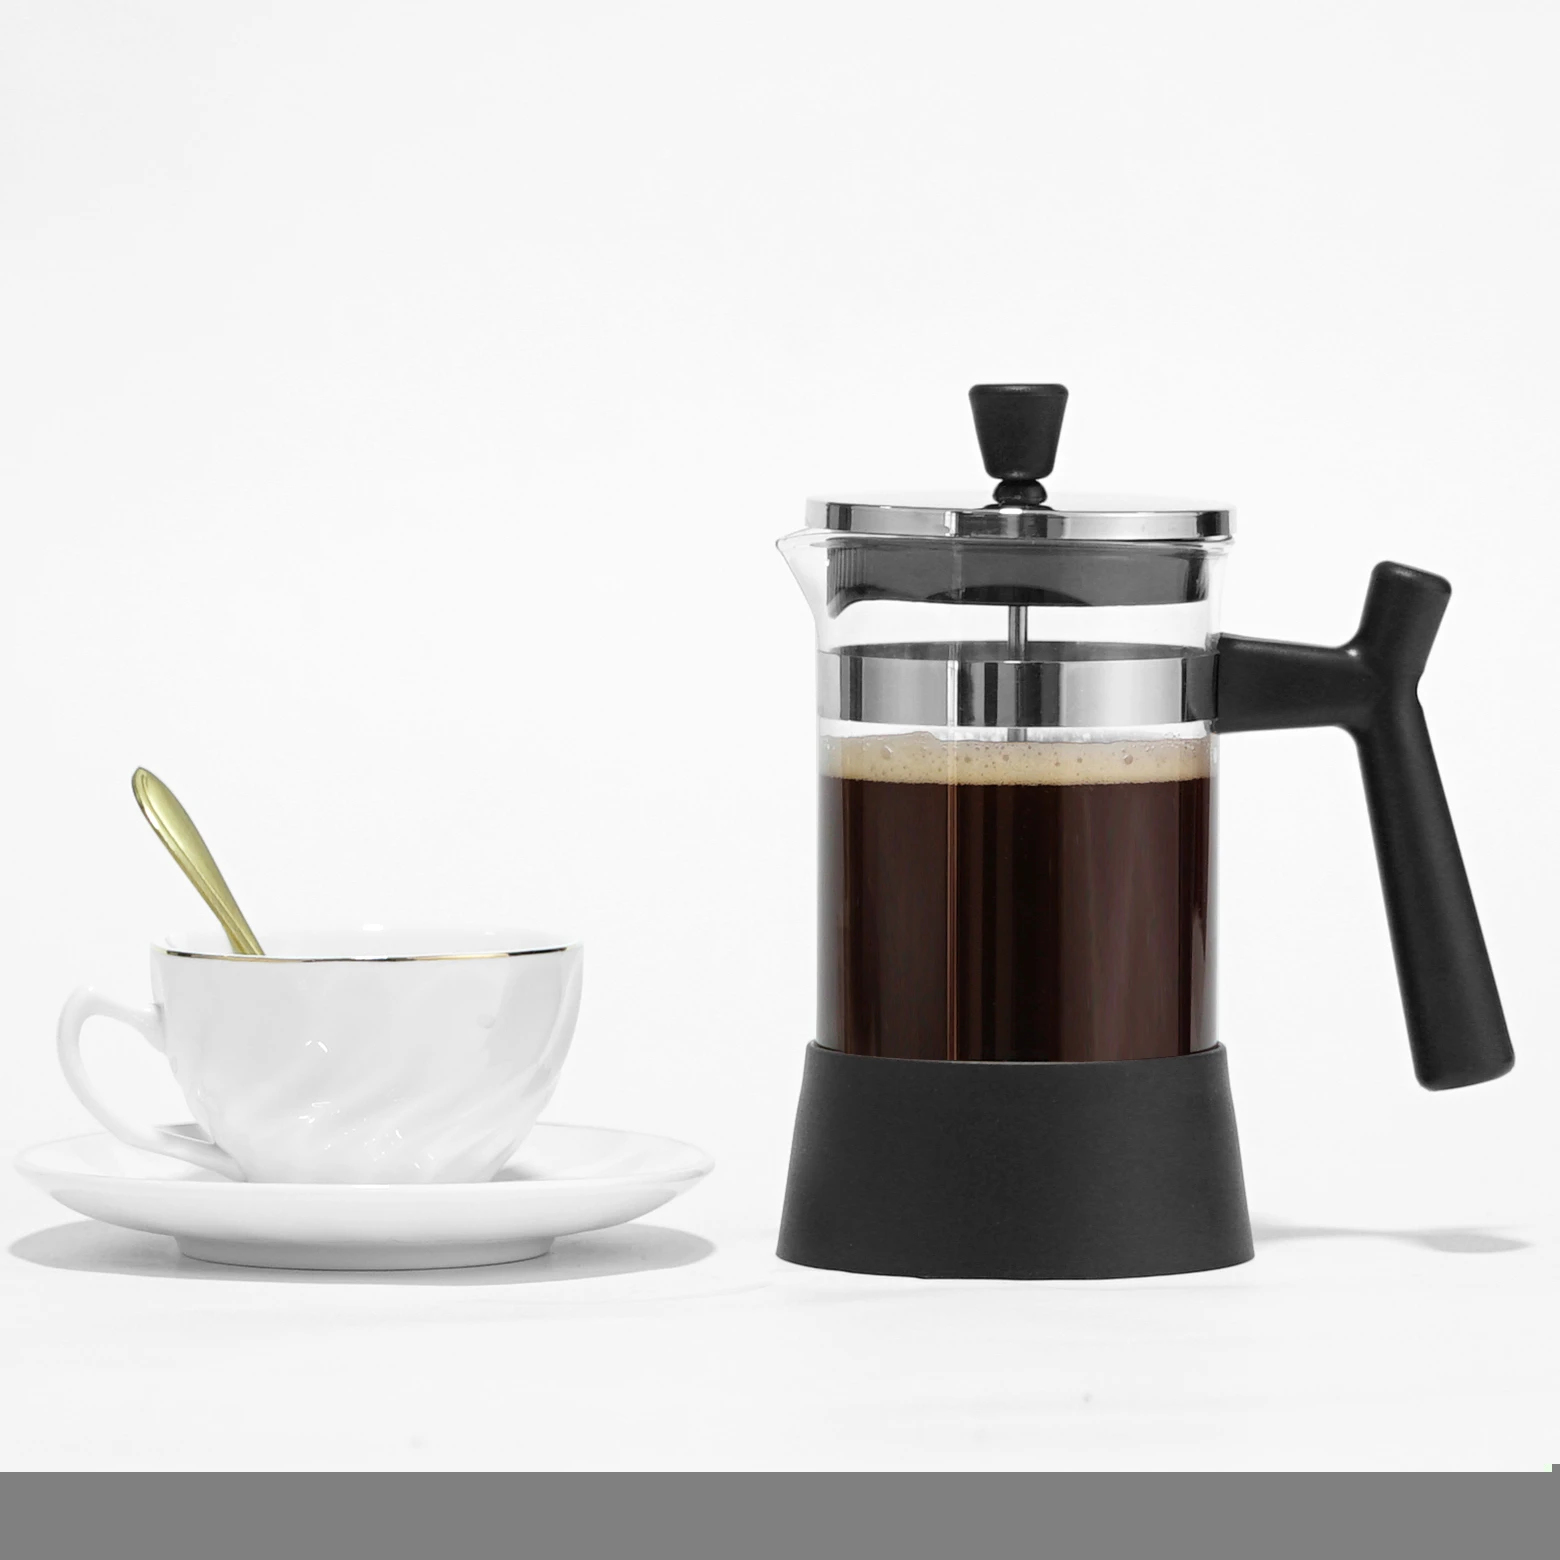 Wholesale Coffee Maker French Press with 600ml